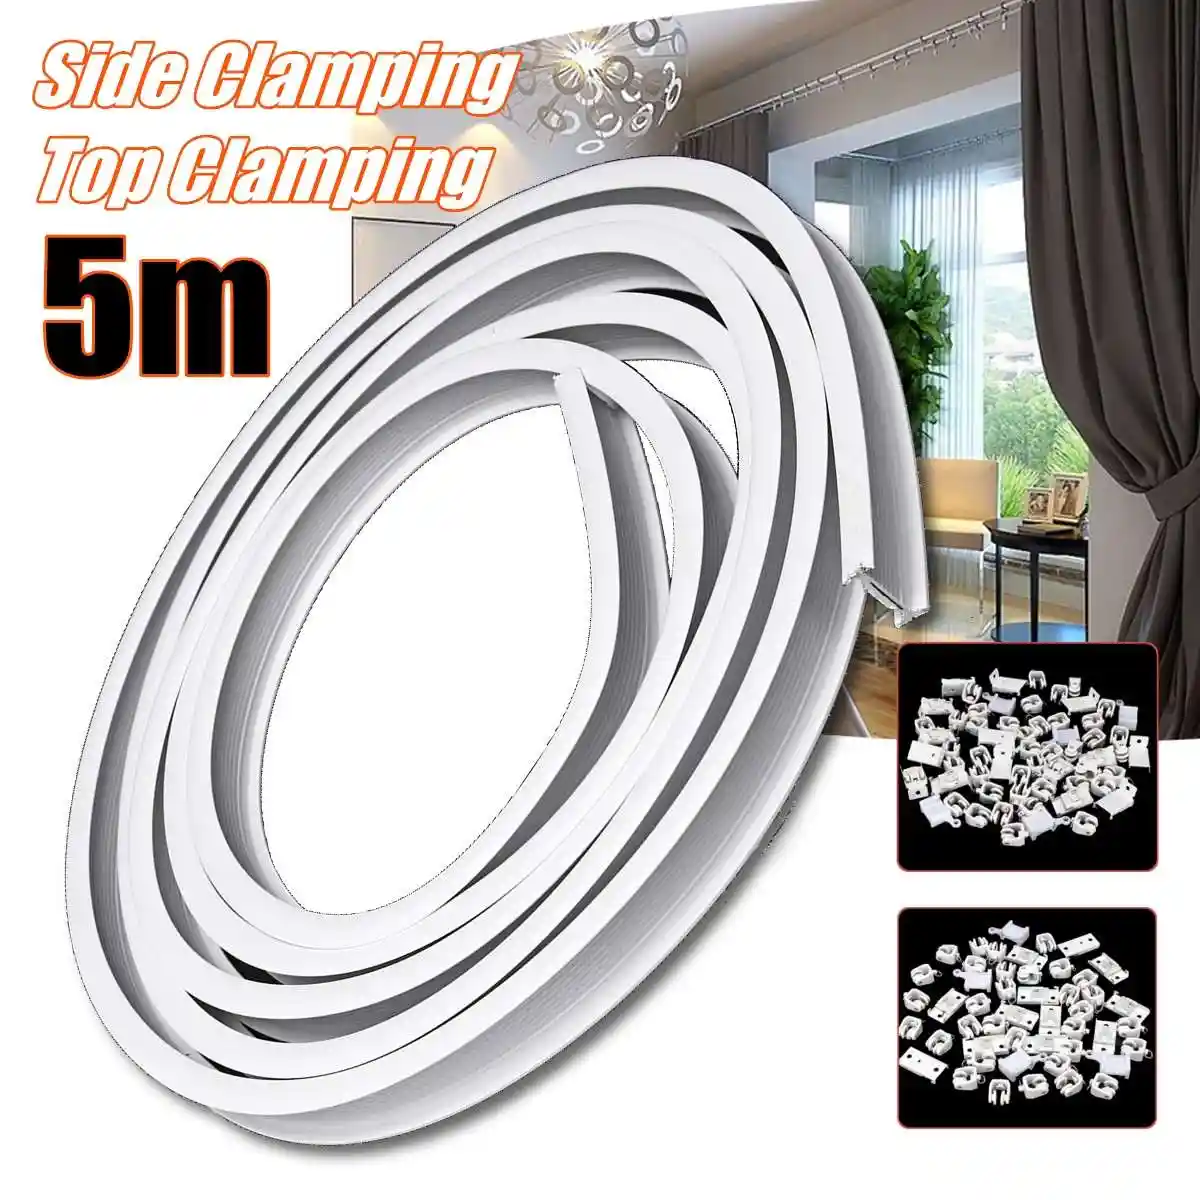 5m Flexible Ceiling Mounted Curtain Track Rail Straight Slide